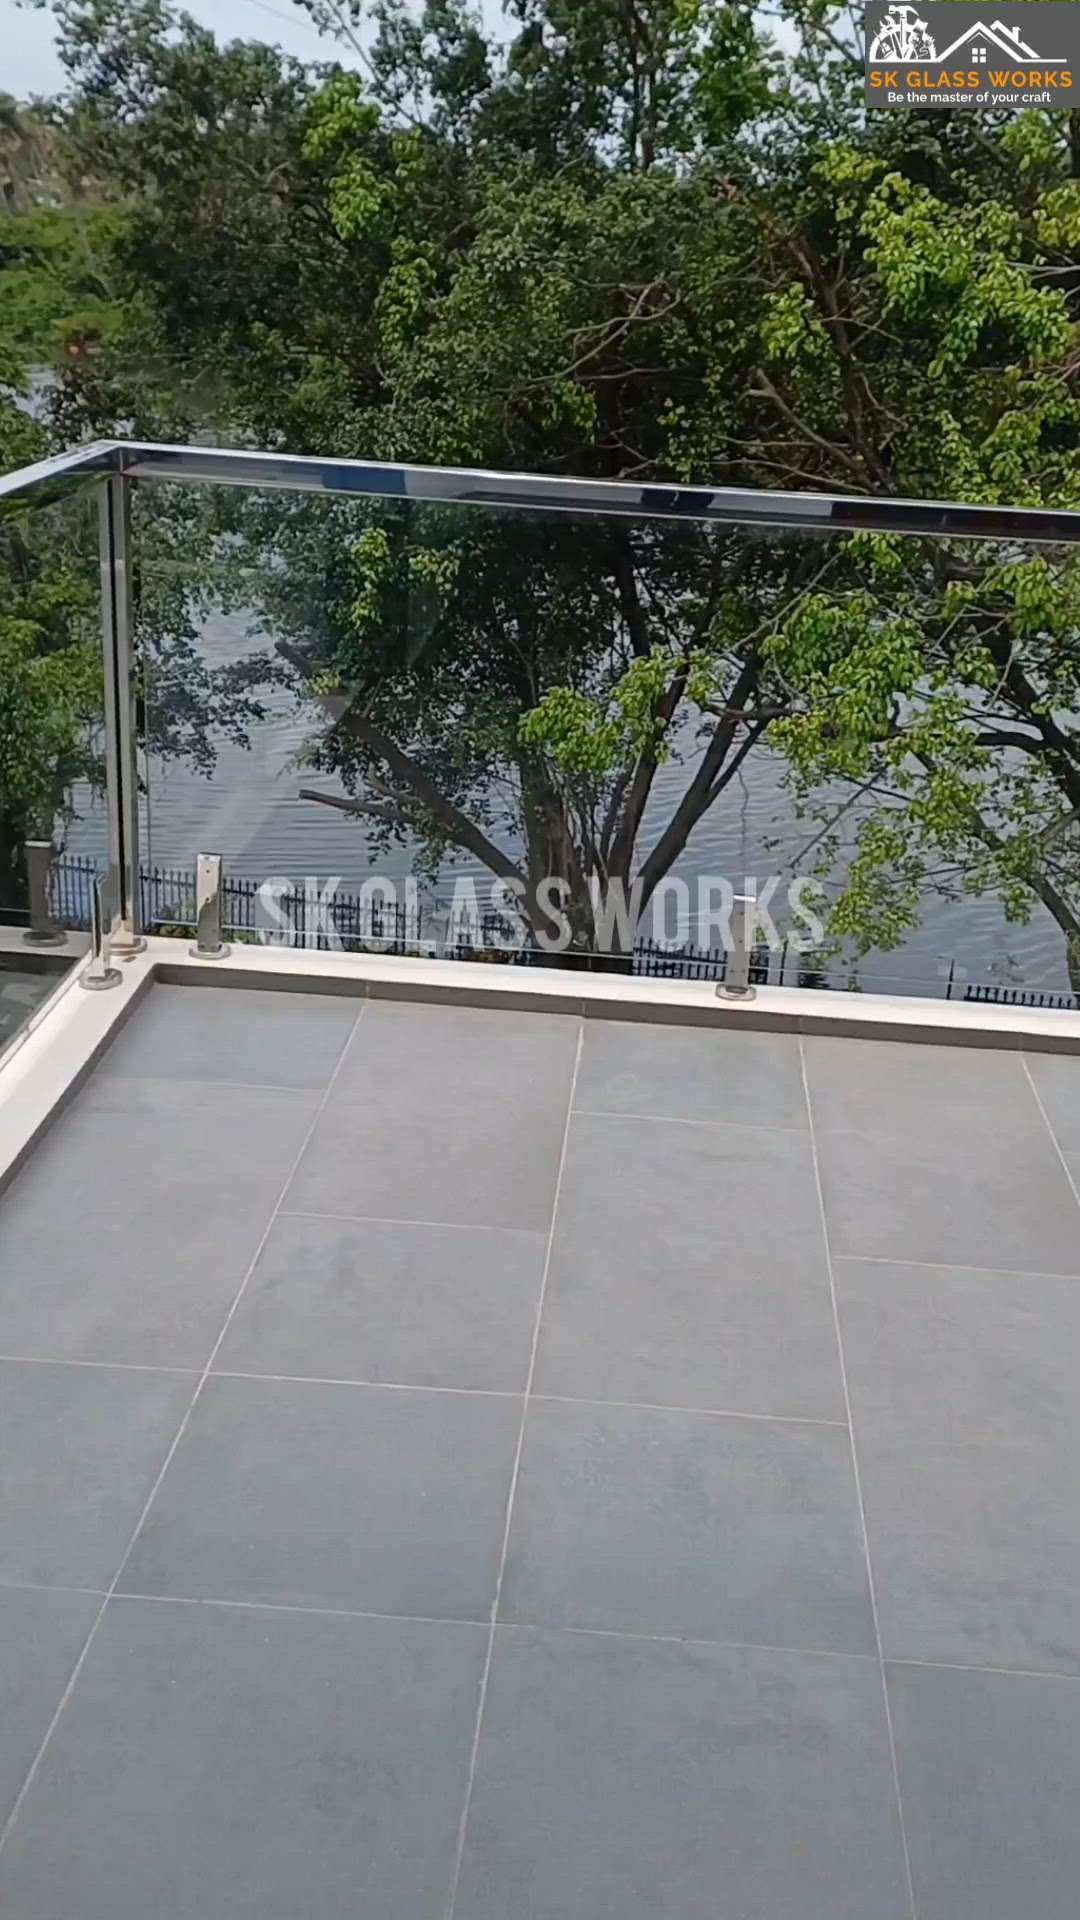 balcony handrail starting from 6000 . contact us 8943432394 #GlassDoors #GlassHandRailStaircase #handrailsteel #handrals